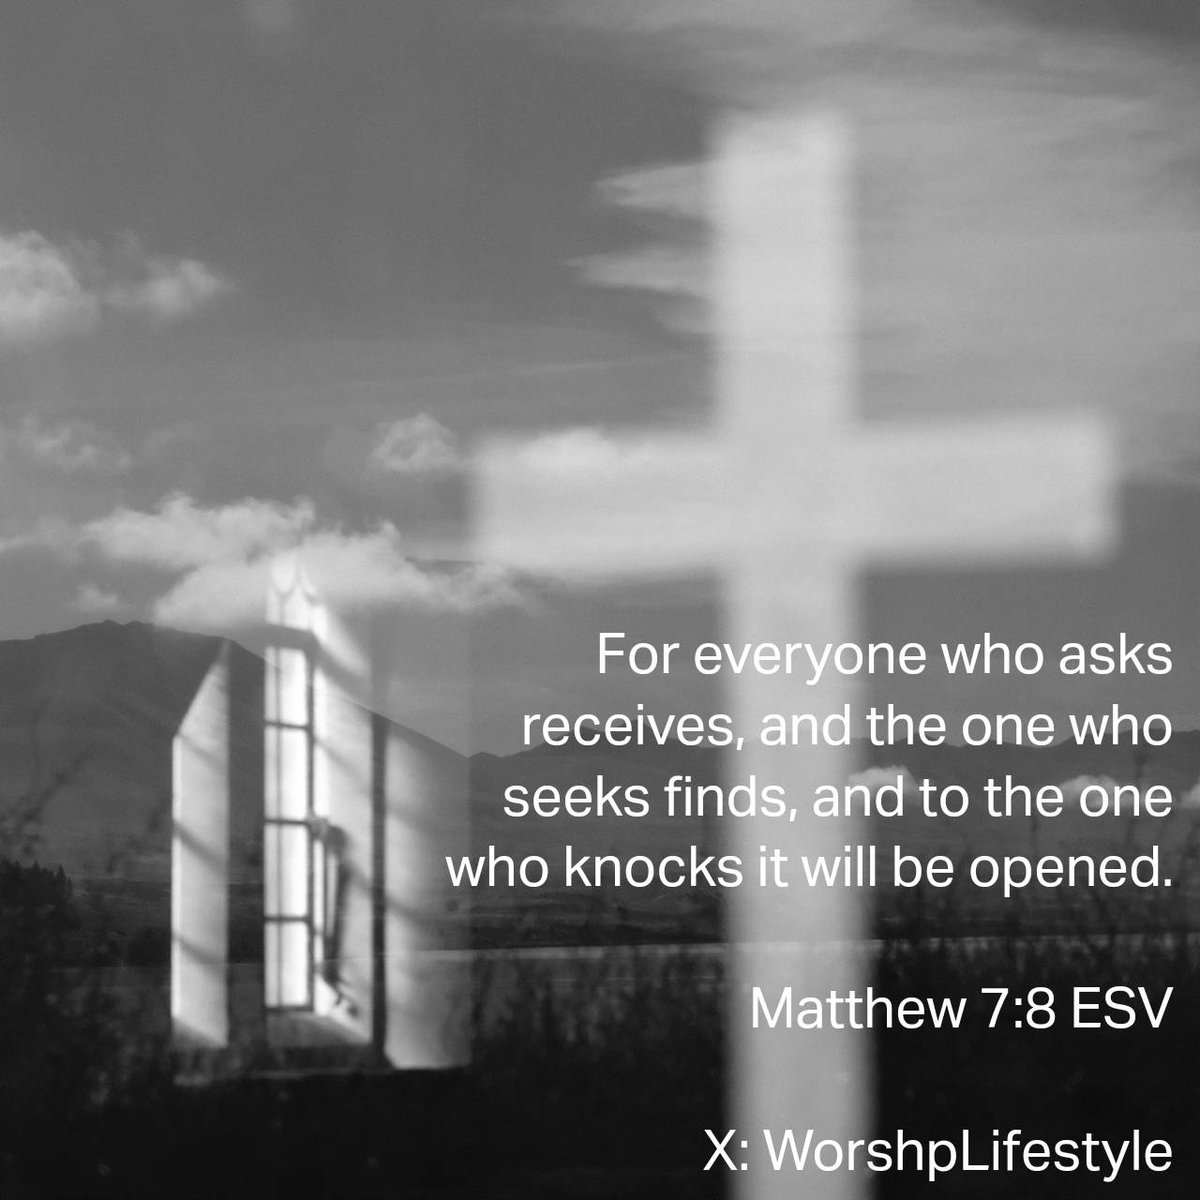 Matthew 7:8 ESV
For everyone who asks receives, and the one who seeks finds, and to the one who knocks it will be opened. 

bible.com/bible/59/mat.7…
#VerseOfTheDay #BibleVerse #WorshpLifestyle #WorshipLifestyle